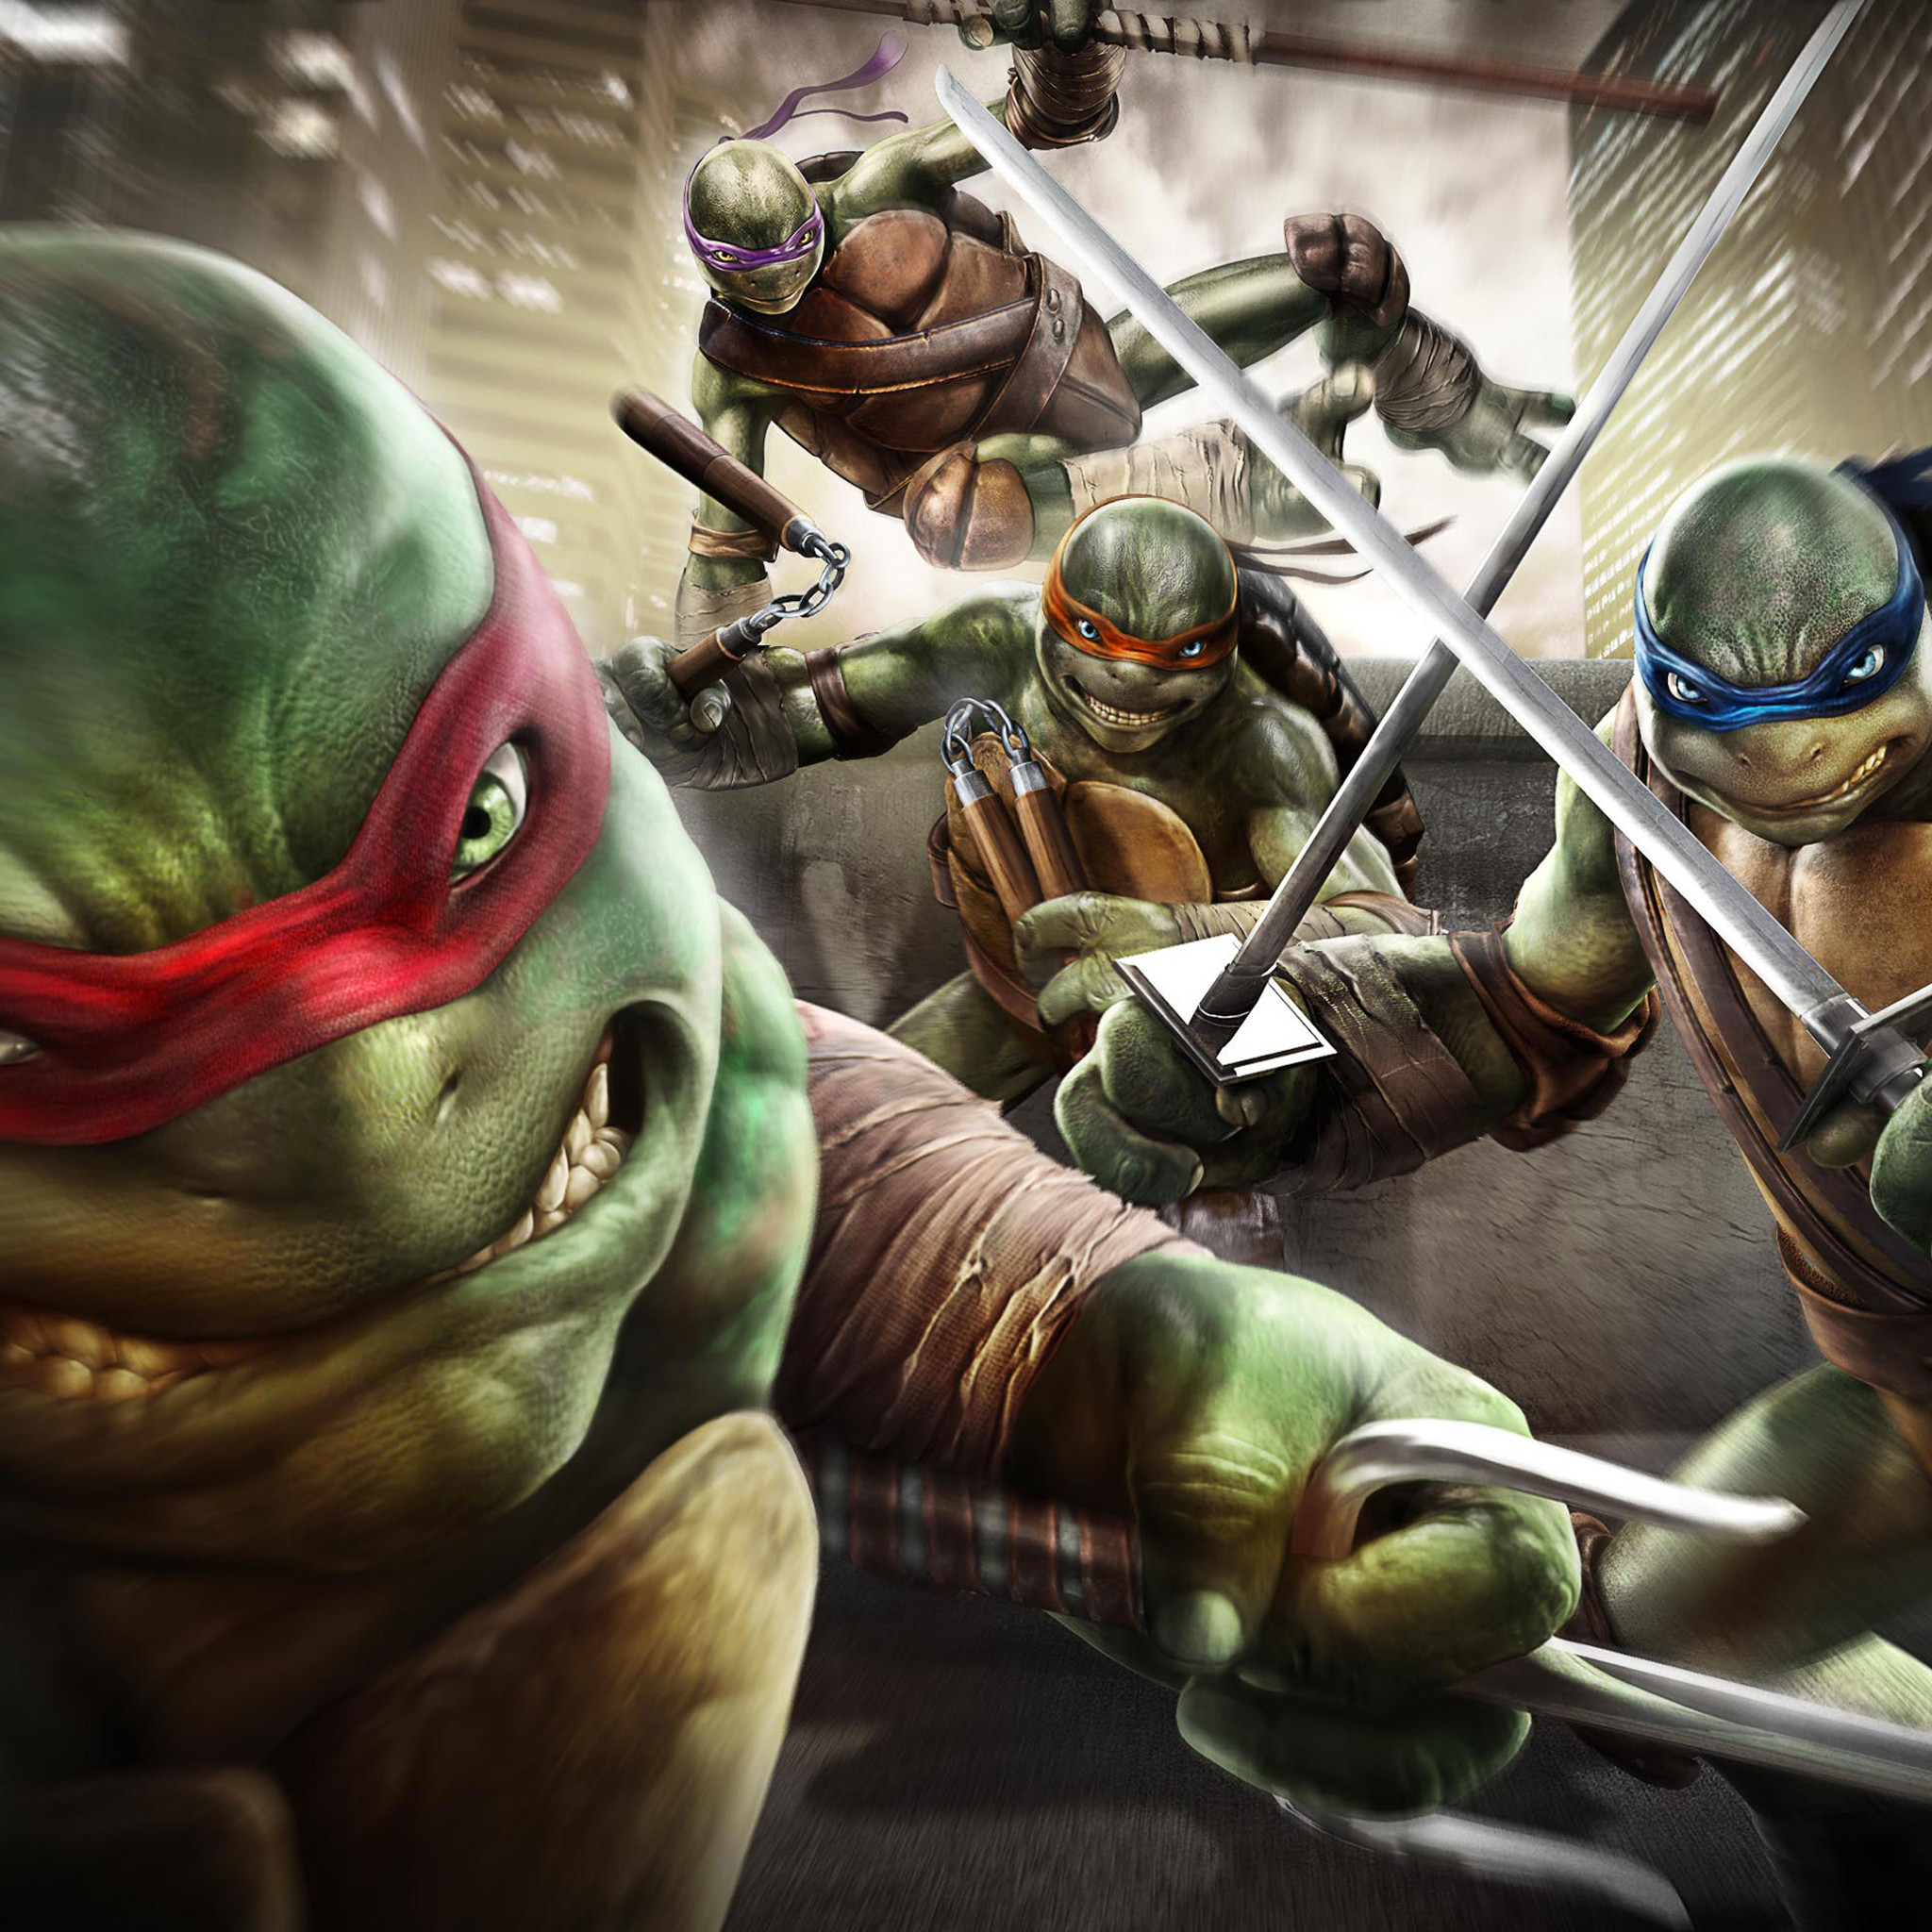 2048x2048 Ninja Turtles Out of the Shadows Game 3Wallpapers iPad Ninja Turtles Out of  the Shadows Game